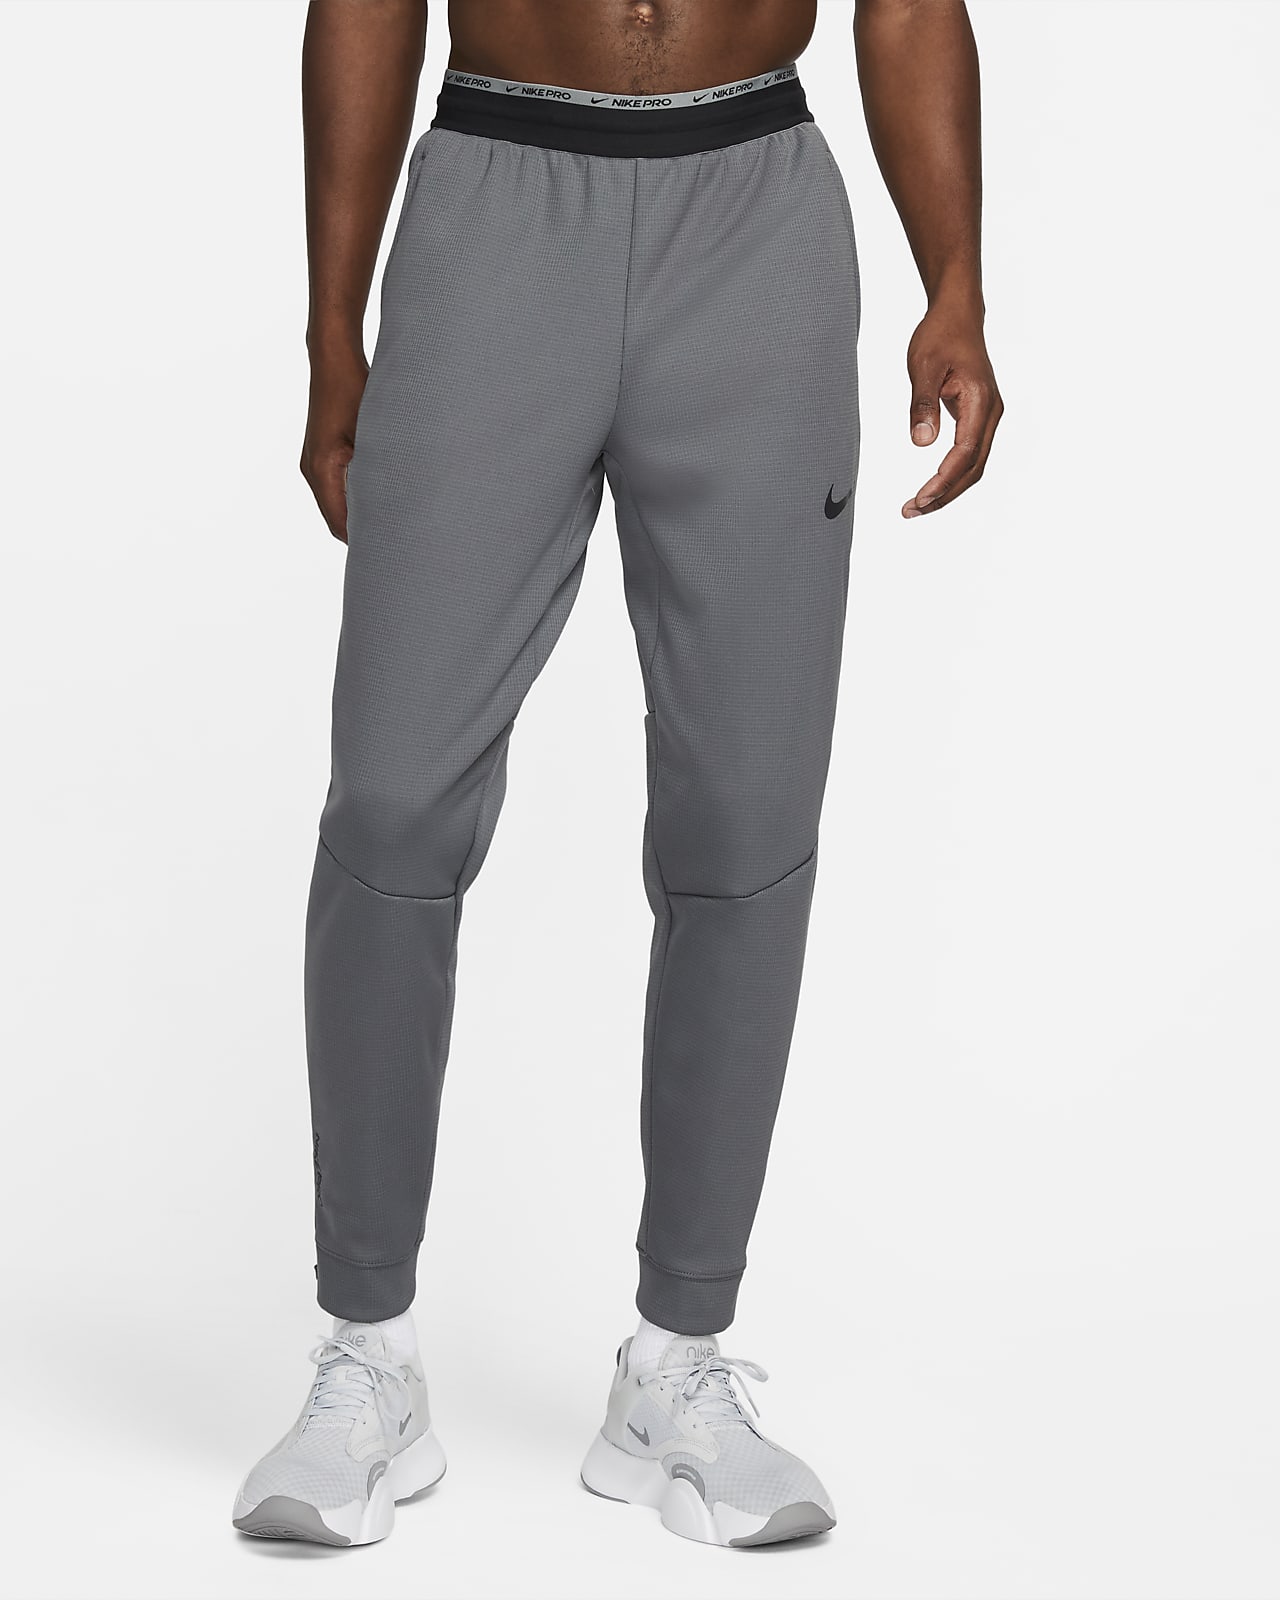 Pantalon de fitness Therma-FIT Nike Therma Sphere pour homme